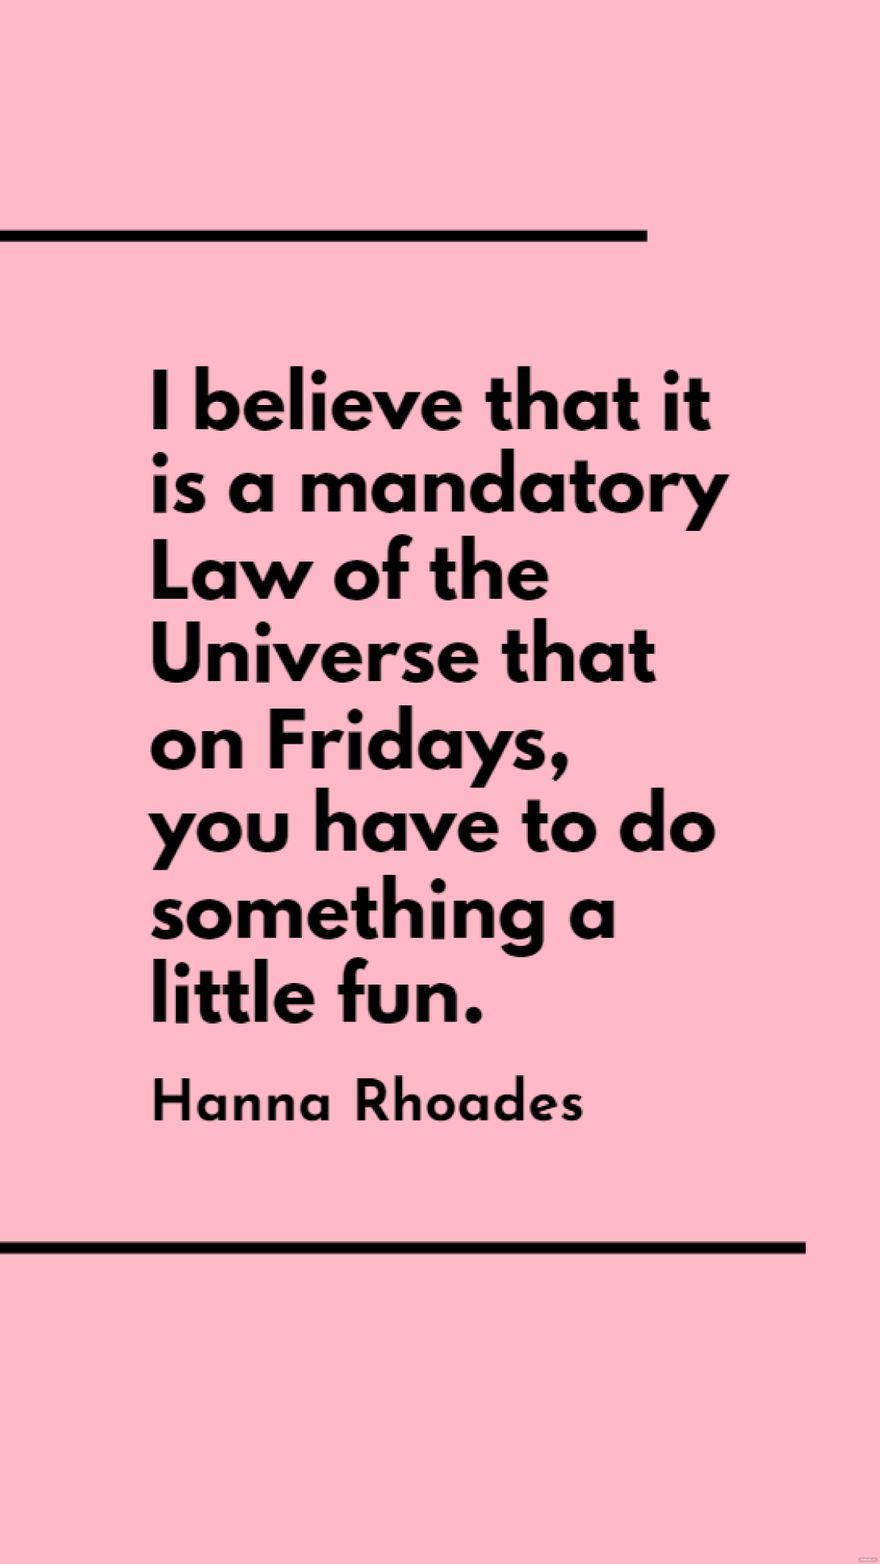 Hanna Rhoades - I believe that it is a mandatory Law of the Universe that on Fridays, you have to do something a little fun. in JPG